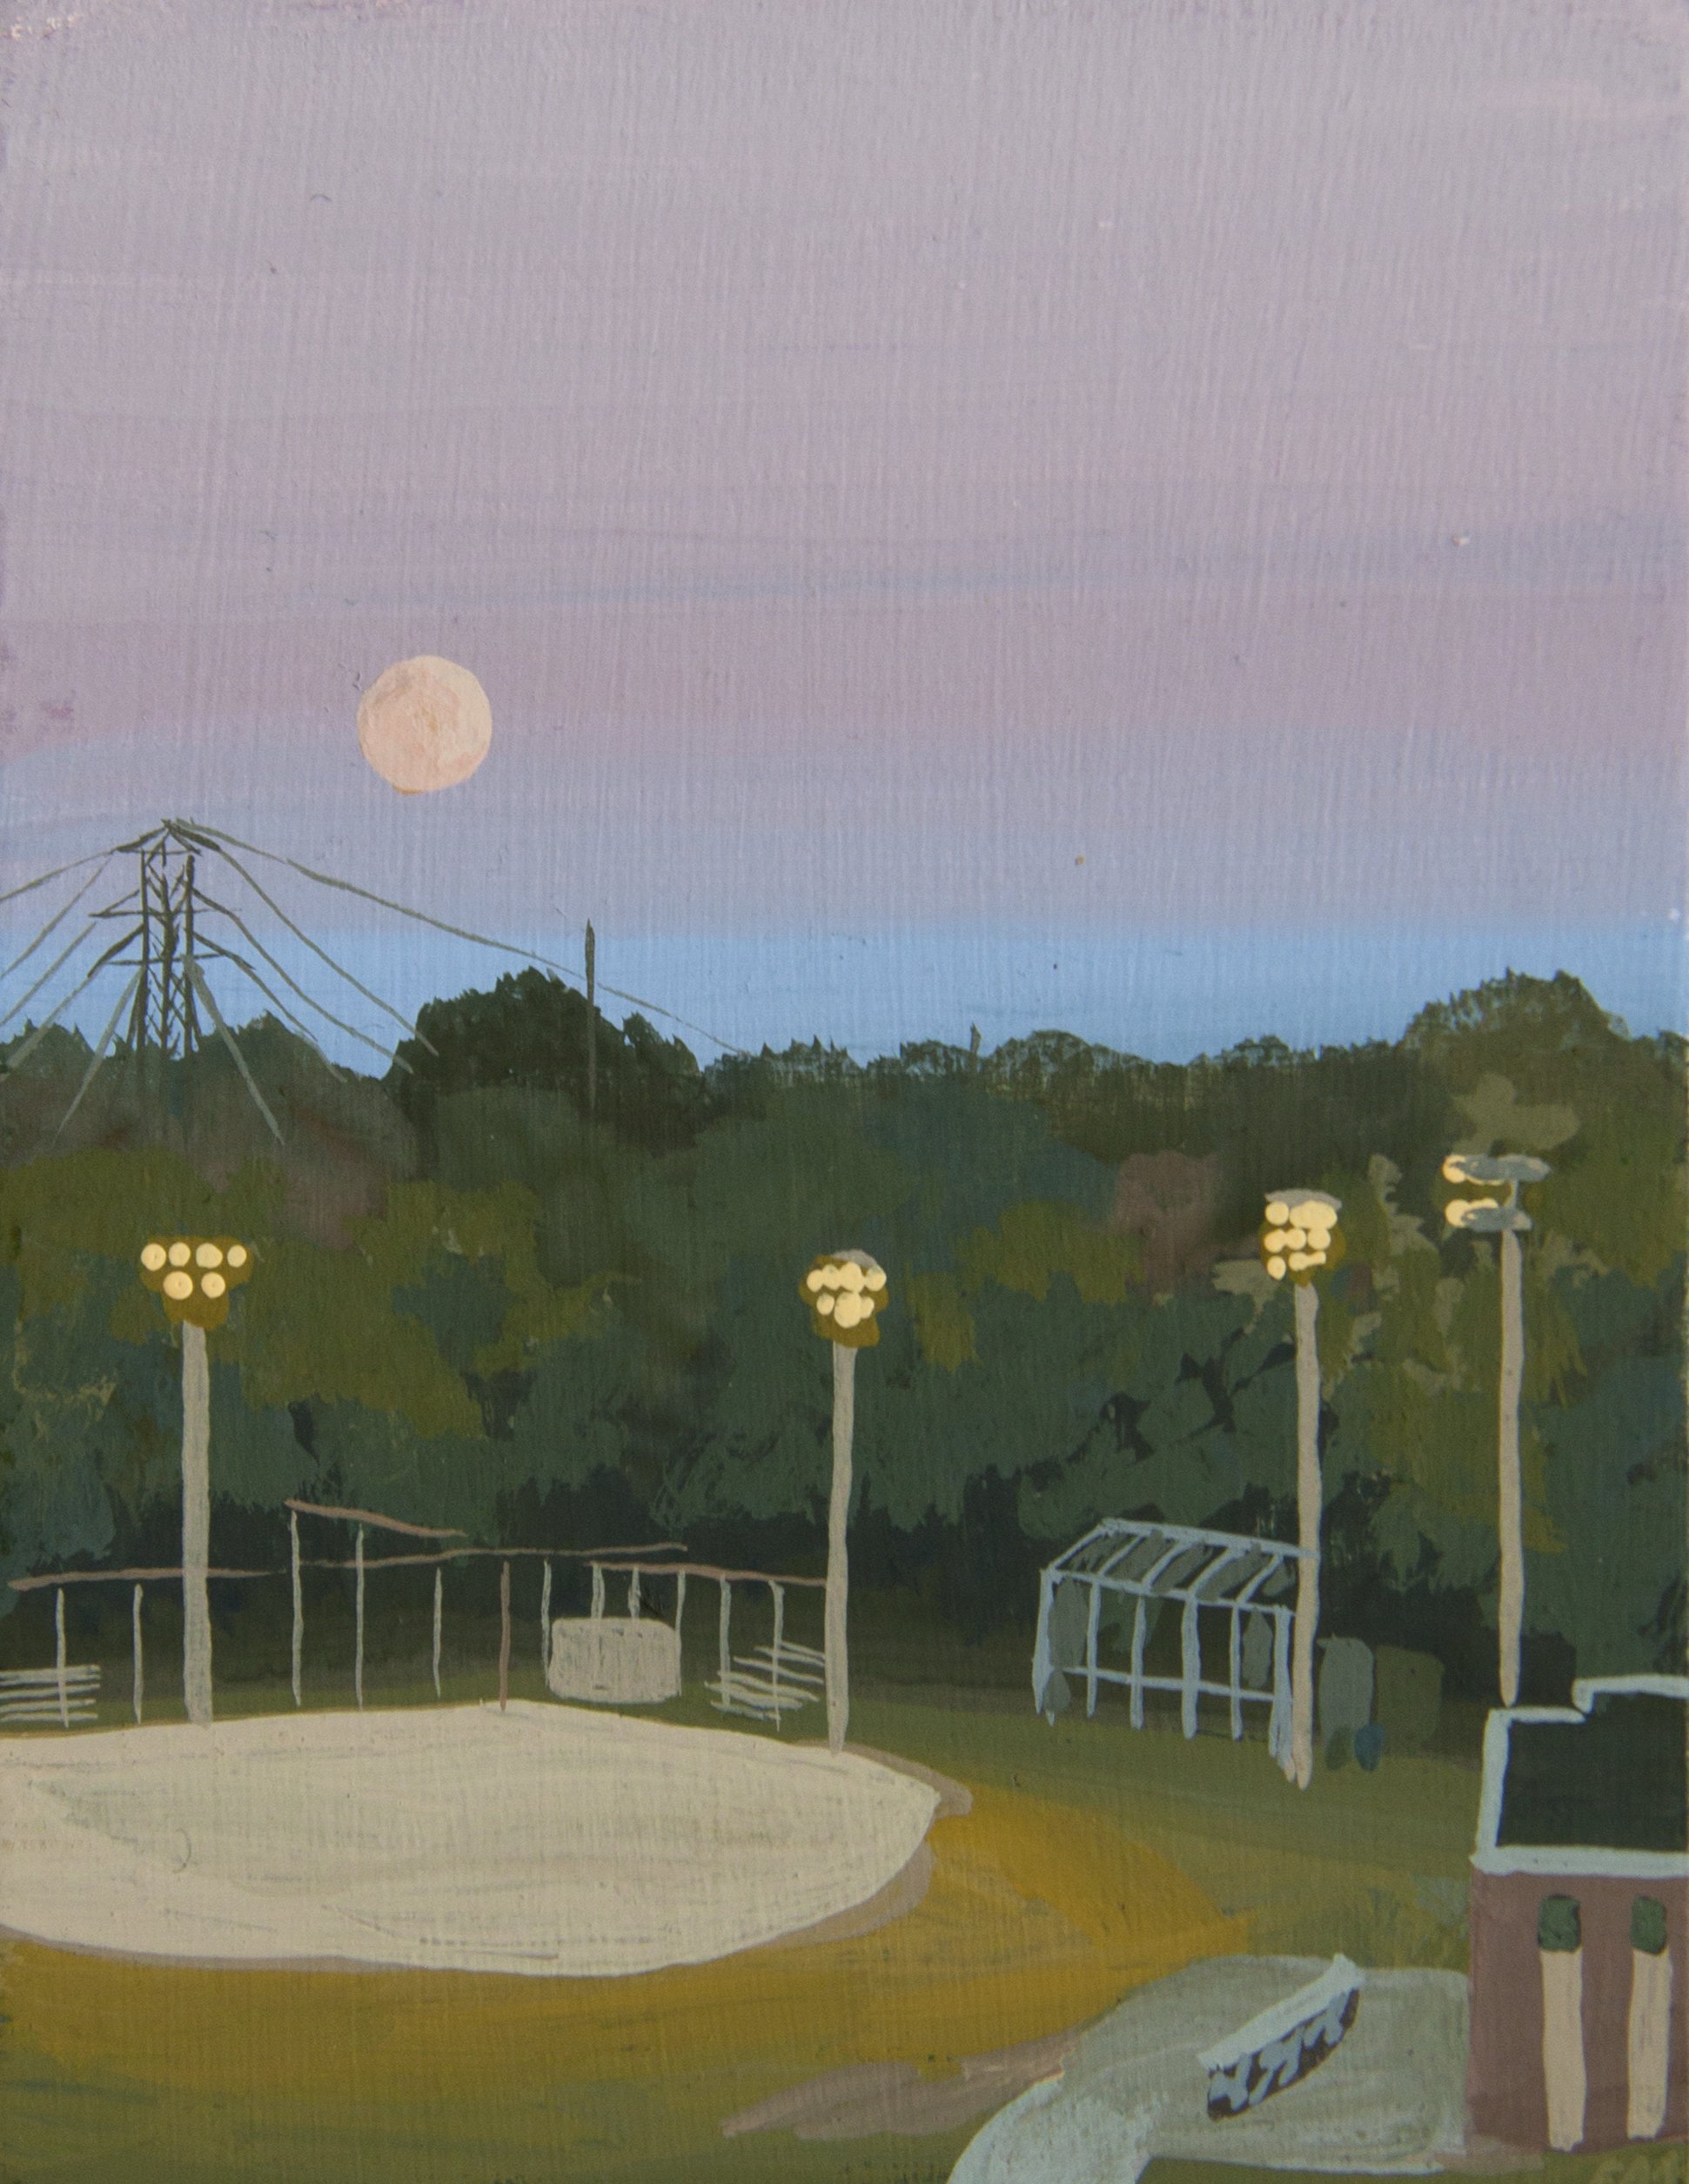   An image of Erin McCluskey’s painting Moon Rising Riverdale Park, which shows a pink and blue sunset, with a whole moon over the baseball diamond and trees of Riverdale park.  